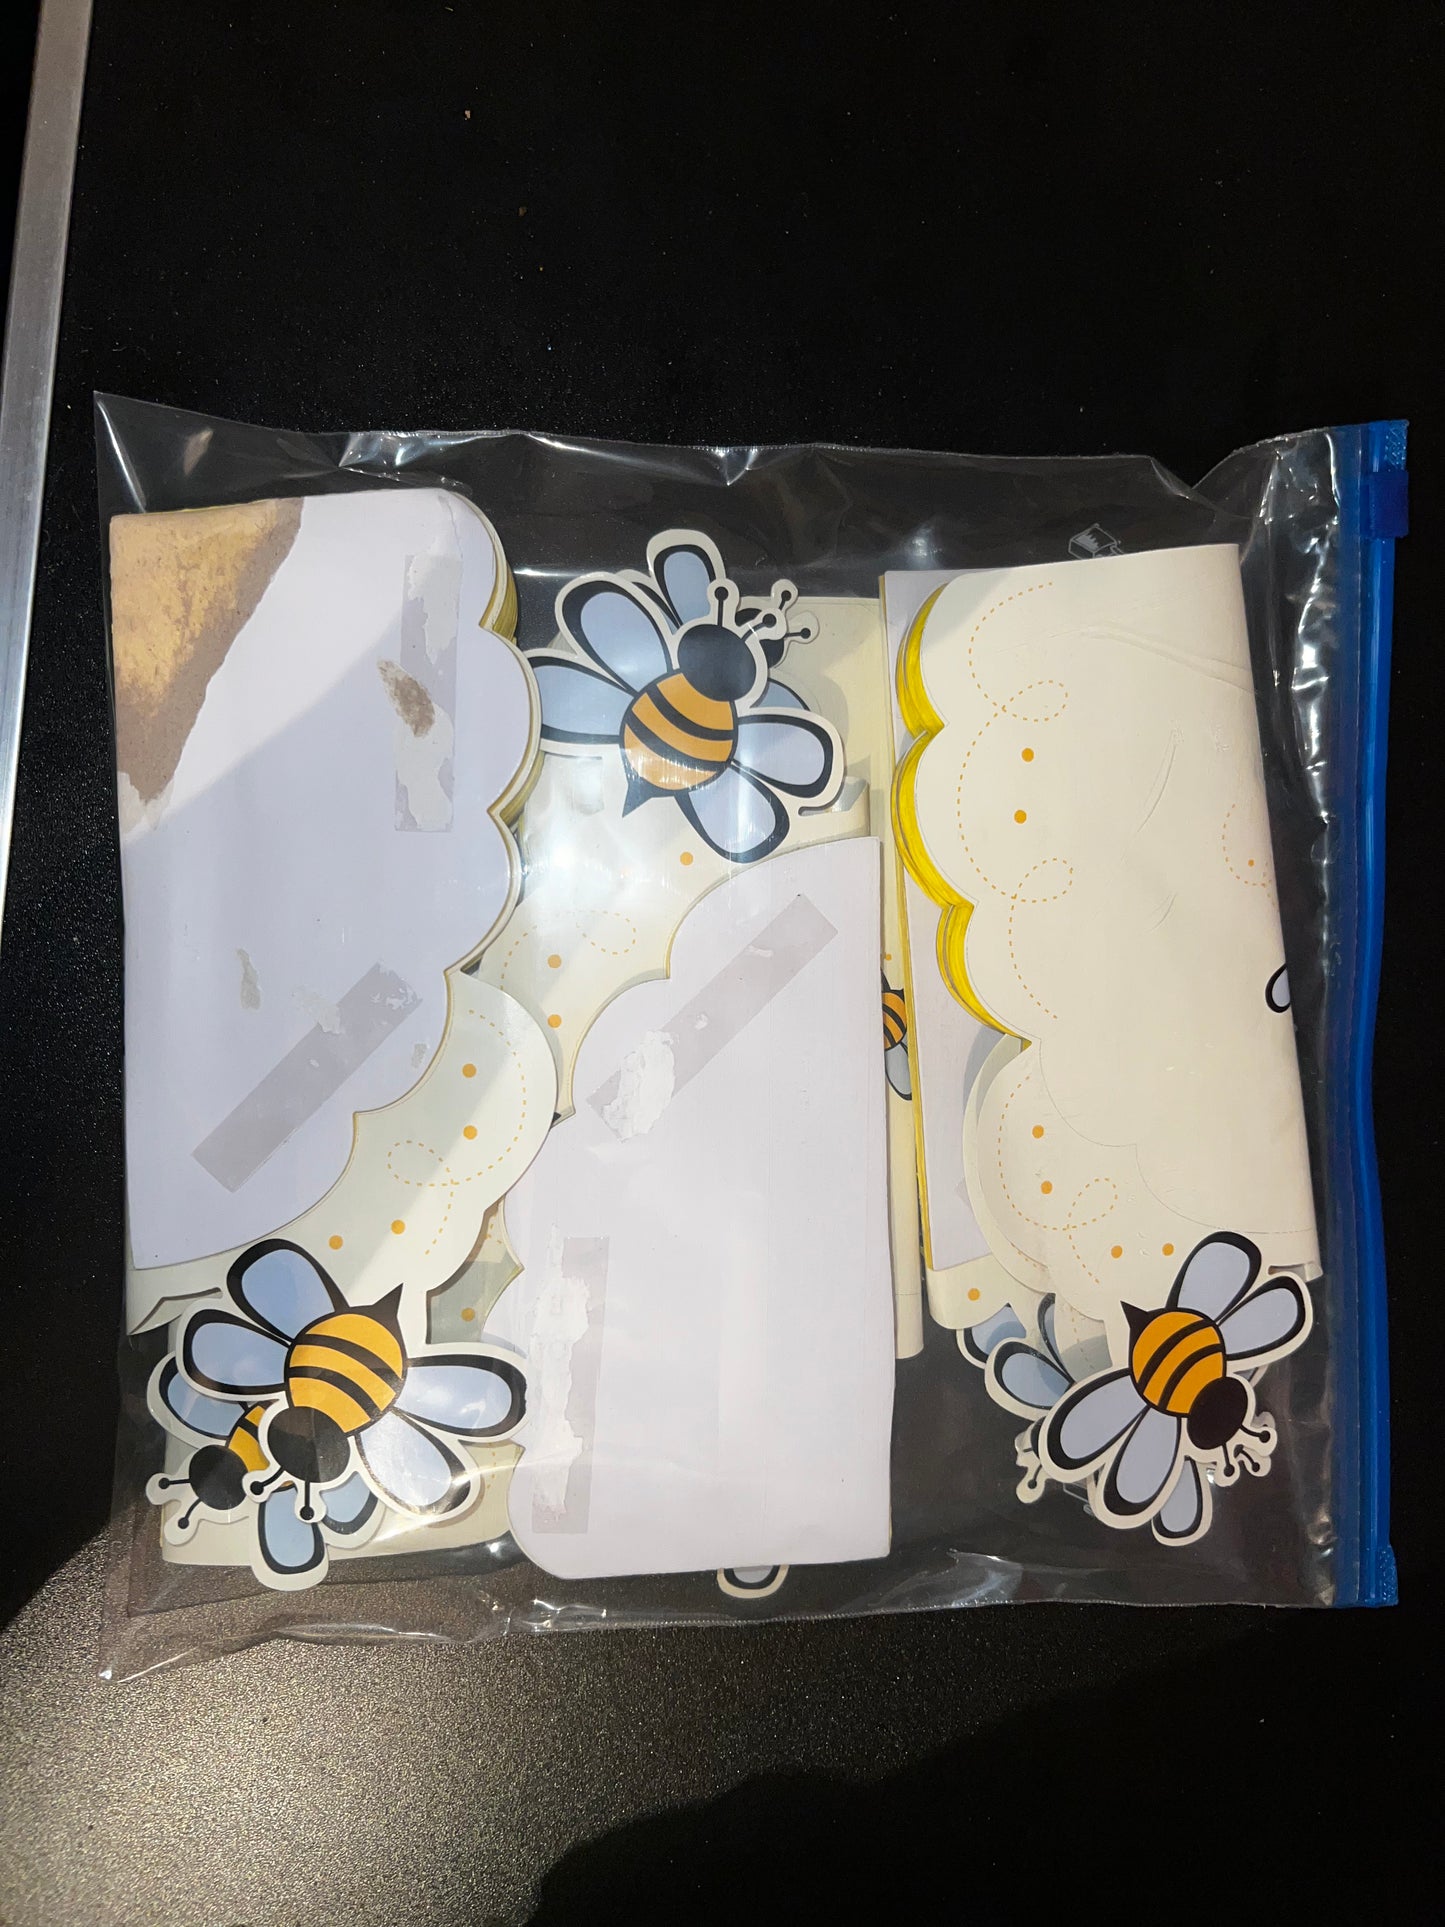 BEE THEMED BABY SHOWER ITEMS